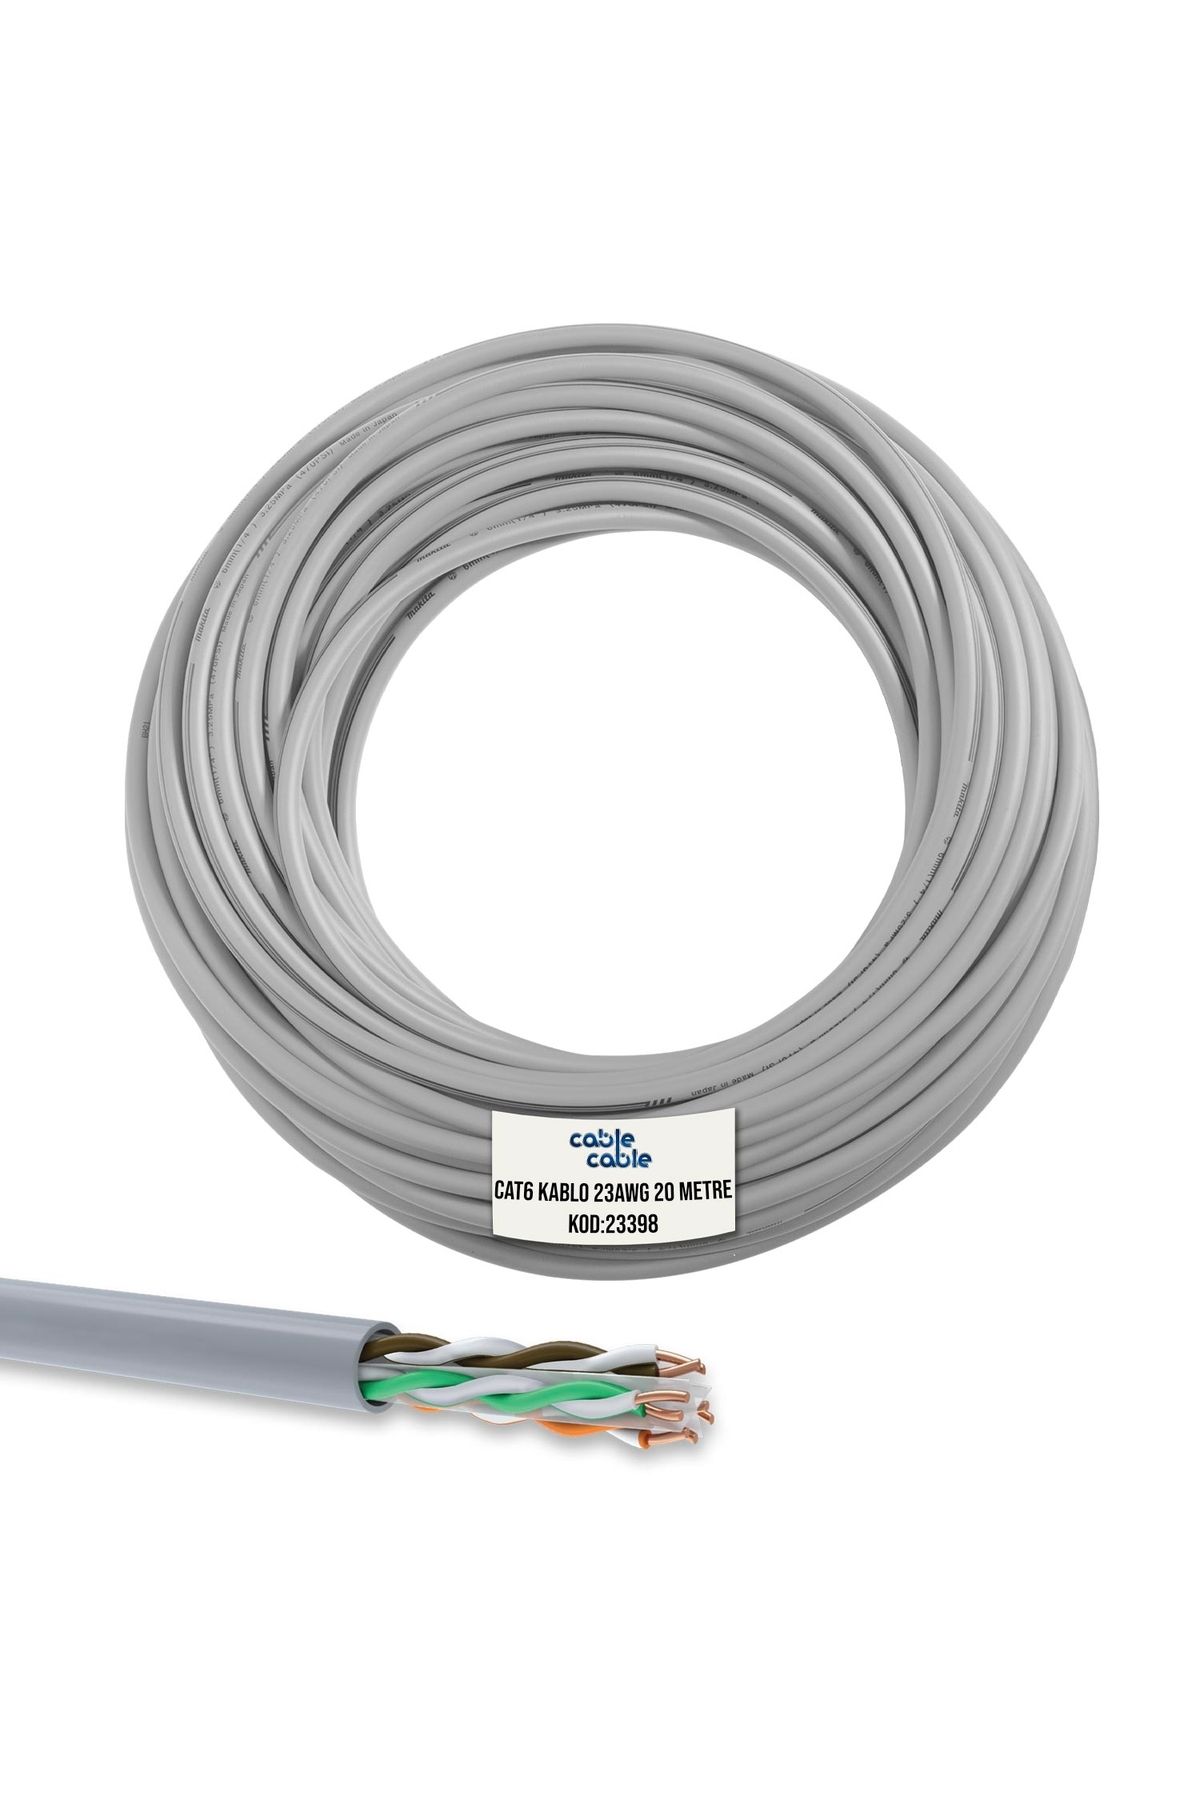 POLAXTOR Cablecable Cat6 Kablo 23awg 0.51mm 20 Metre